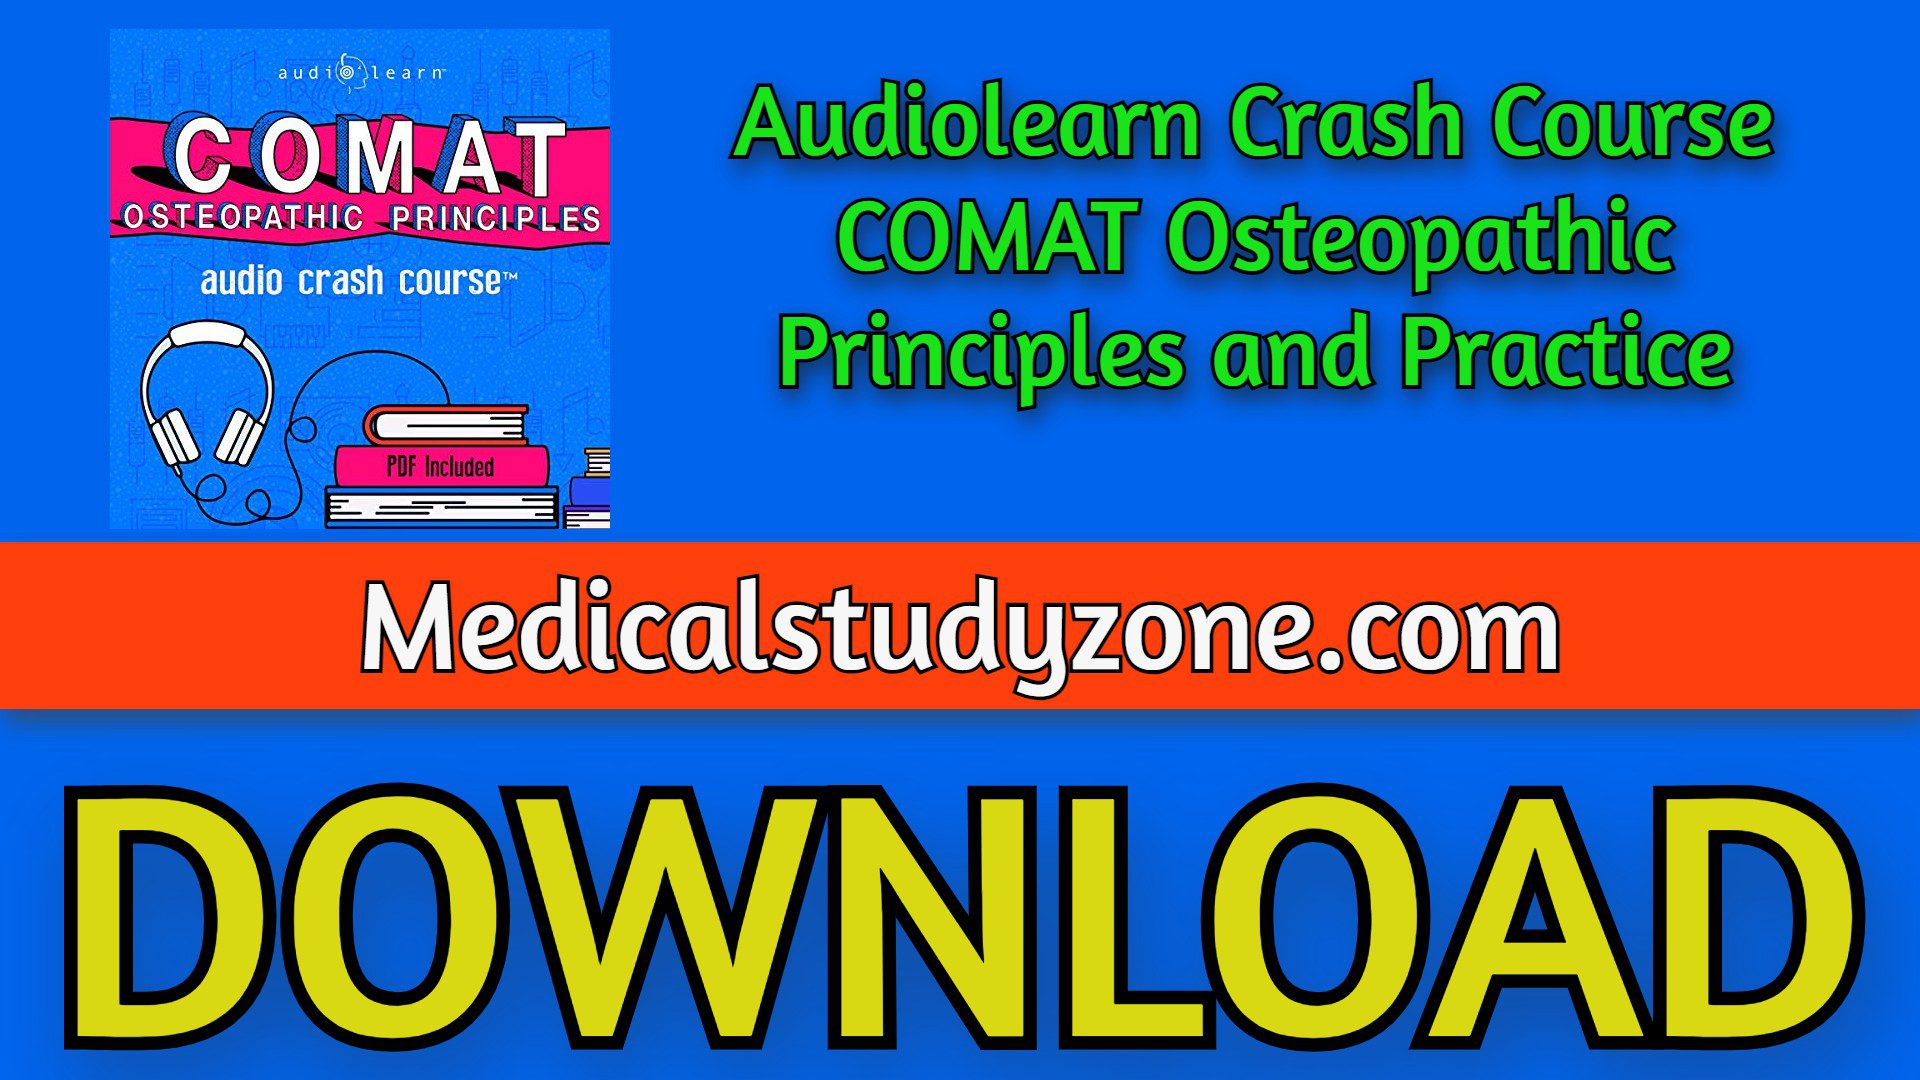 Audiolearn Crash Course COMAT Osteopathic Principles and Practice 2021 Free Download